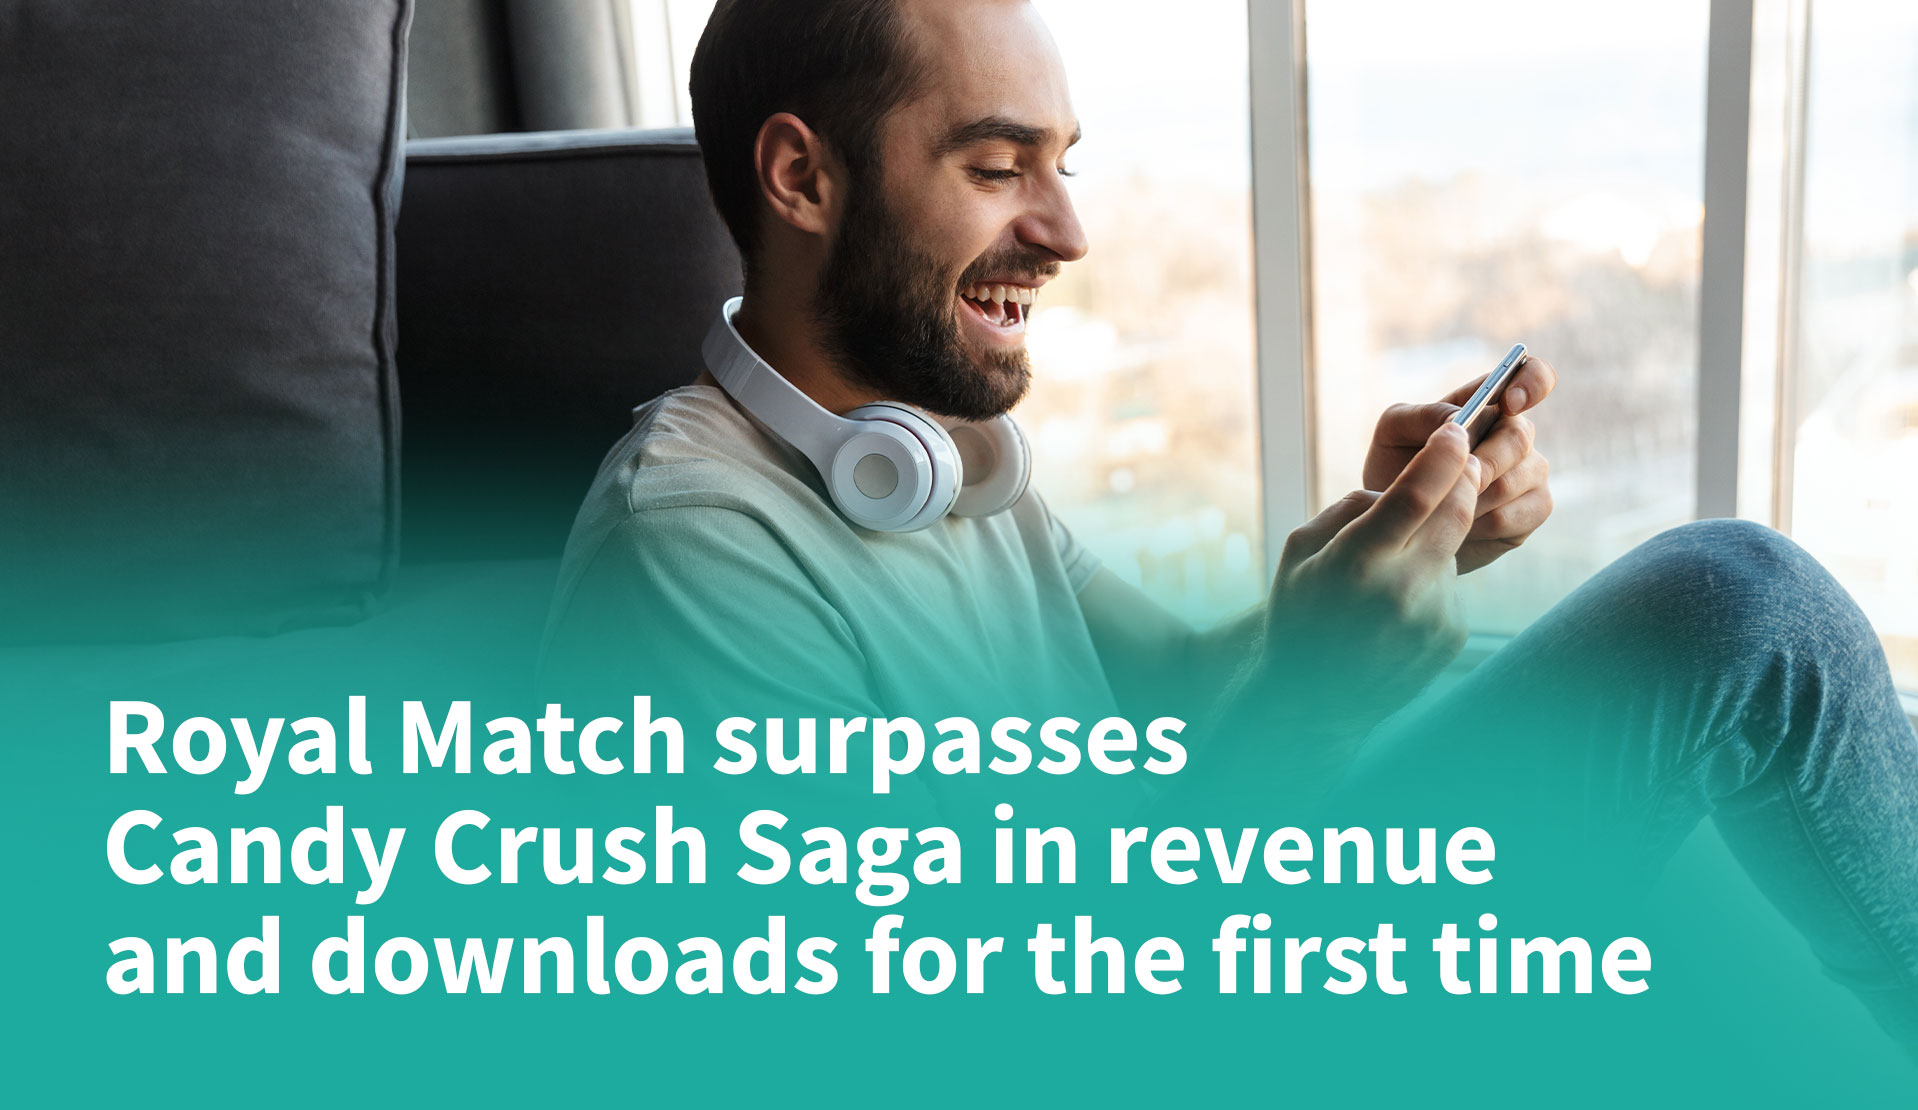 Royal-Match-Surpasses-Candy-Crush-Saga-in-Revenue-and-Downloads-for-the-First-Time-